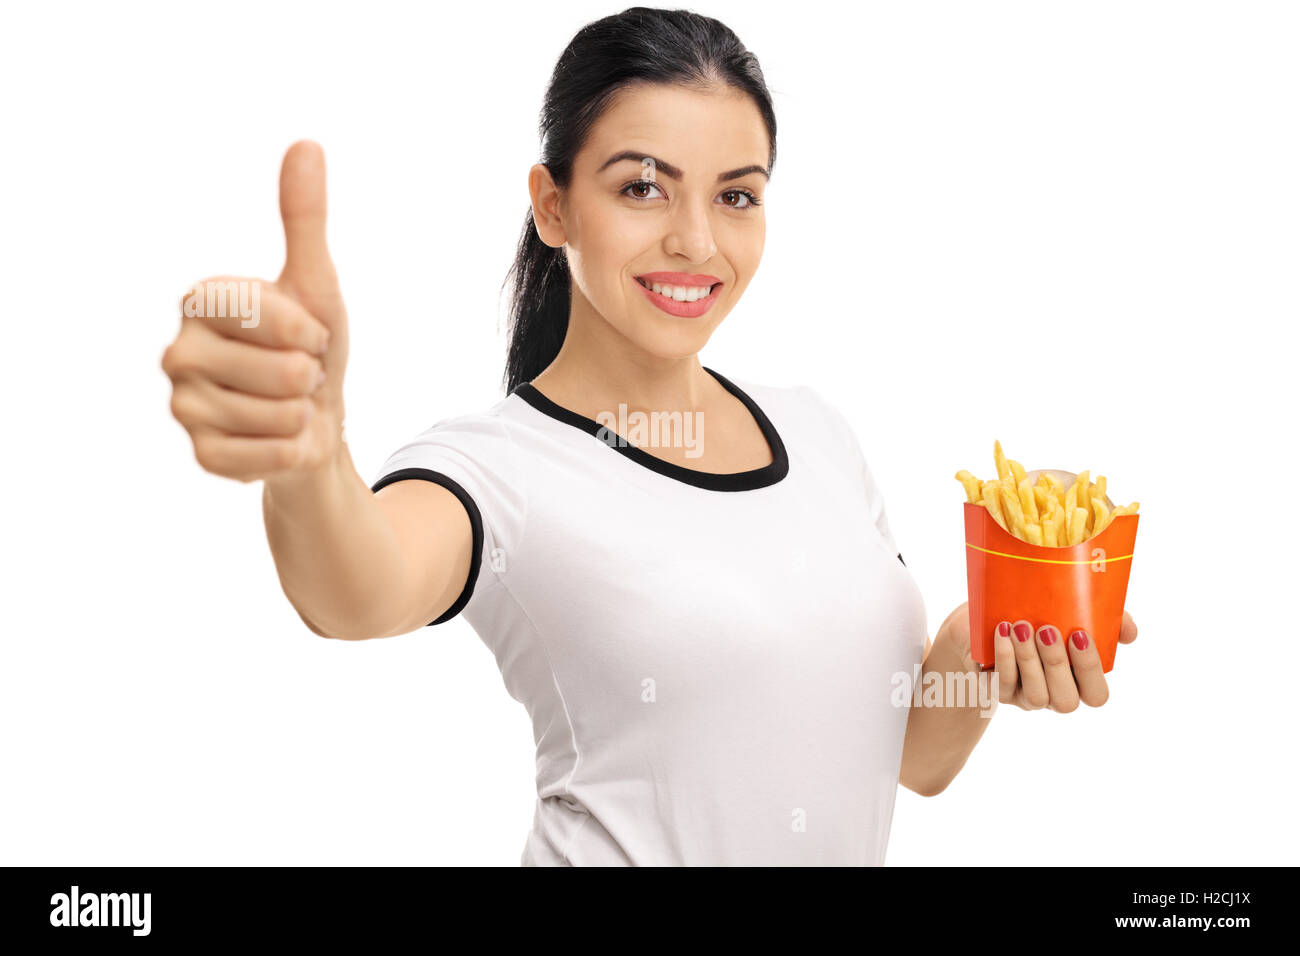 Smiling woman holding a bag of fries and giving a thumb up isolated on white background Stock Photo